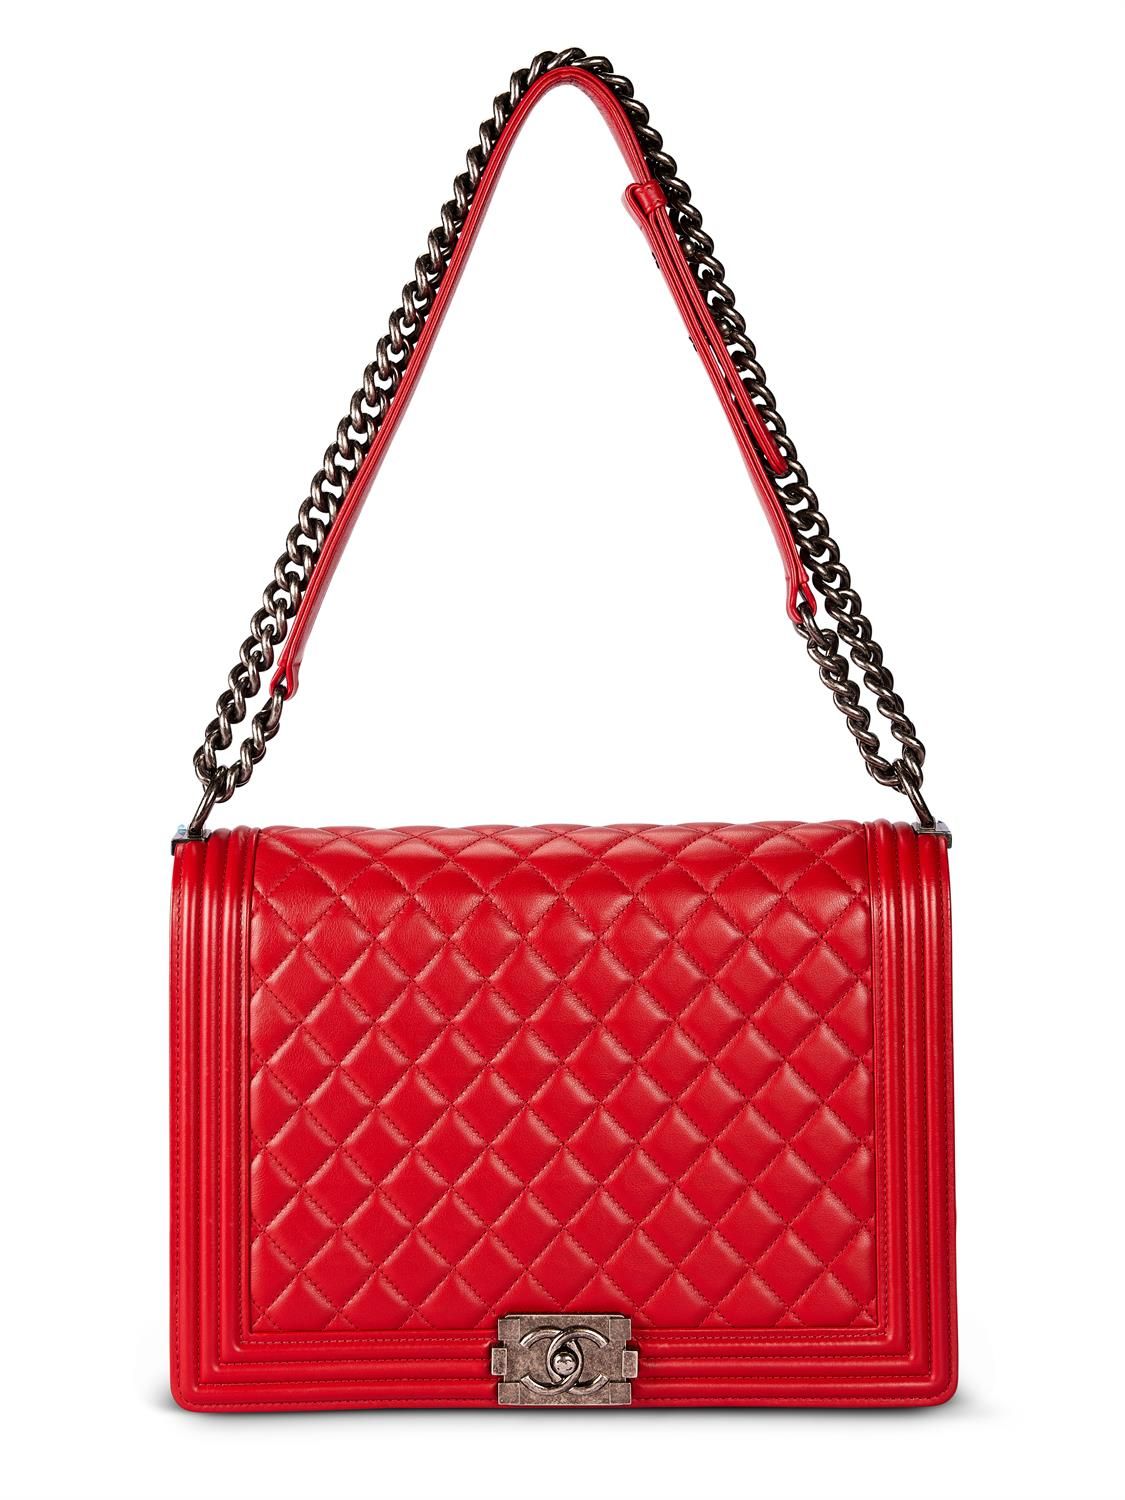 Chanel, Boy, a red calfskin quilted leather shoulder bag Chanel, Boy, a red calf&hellip;